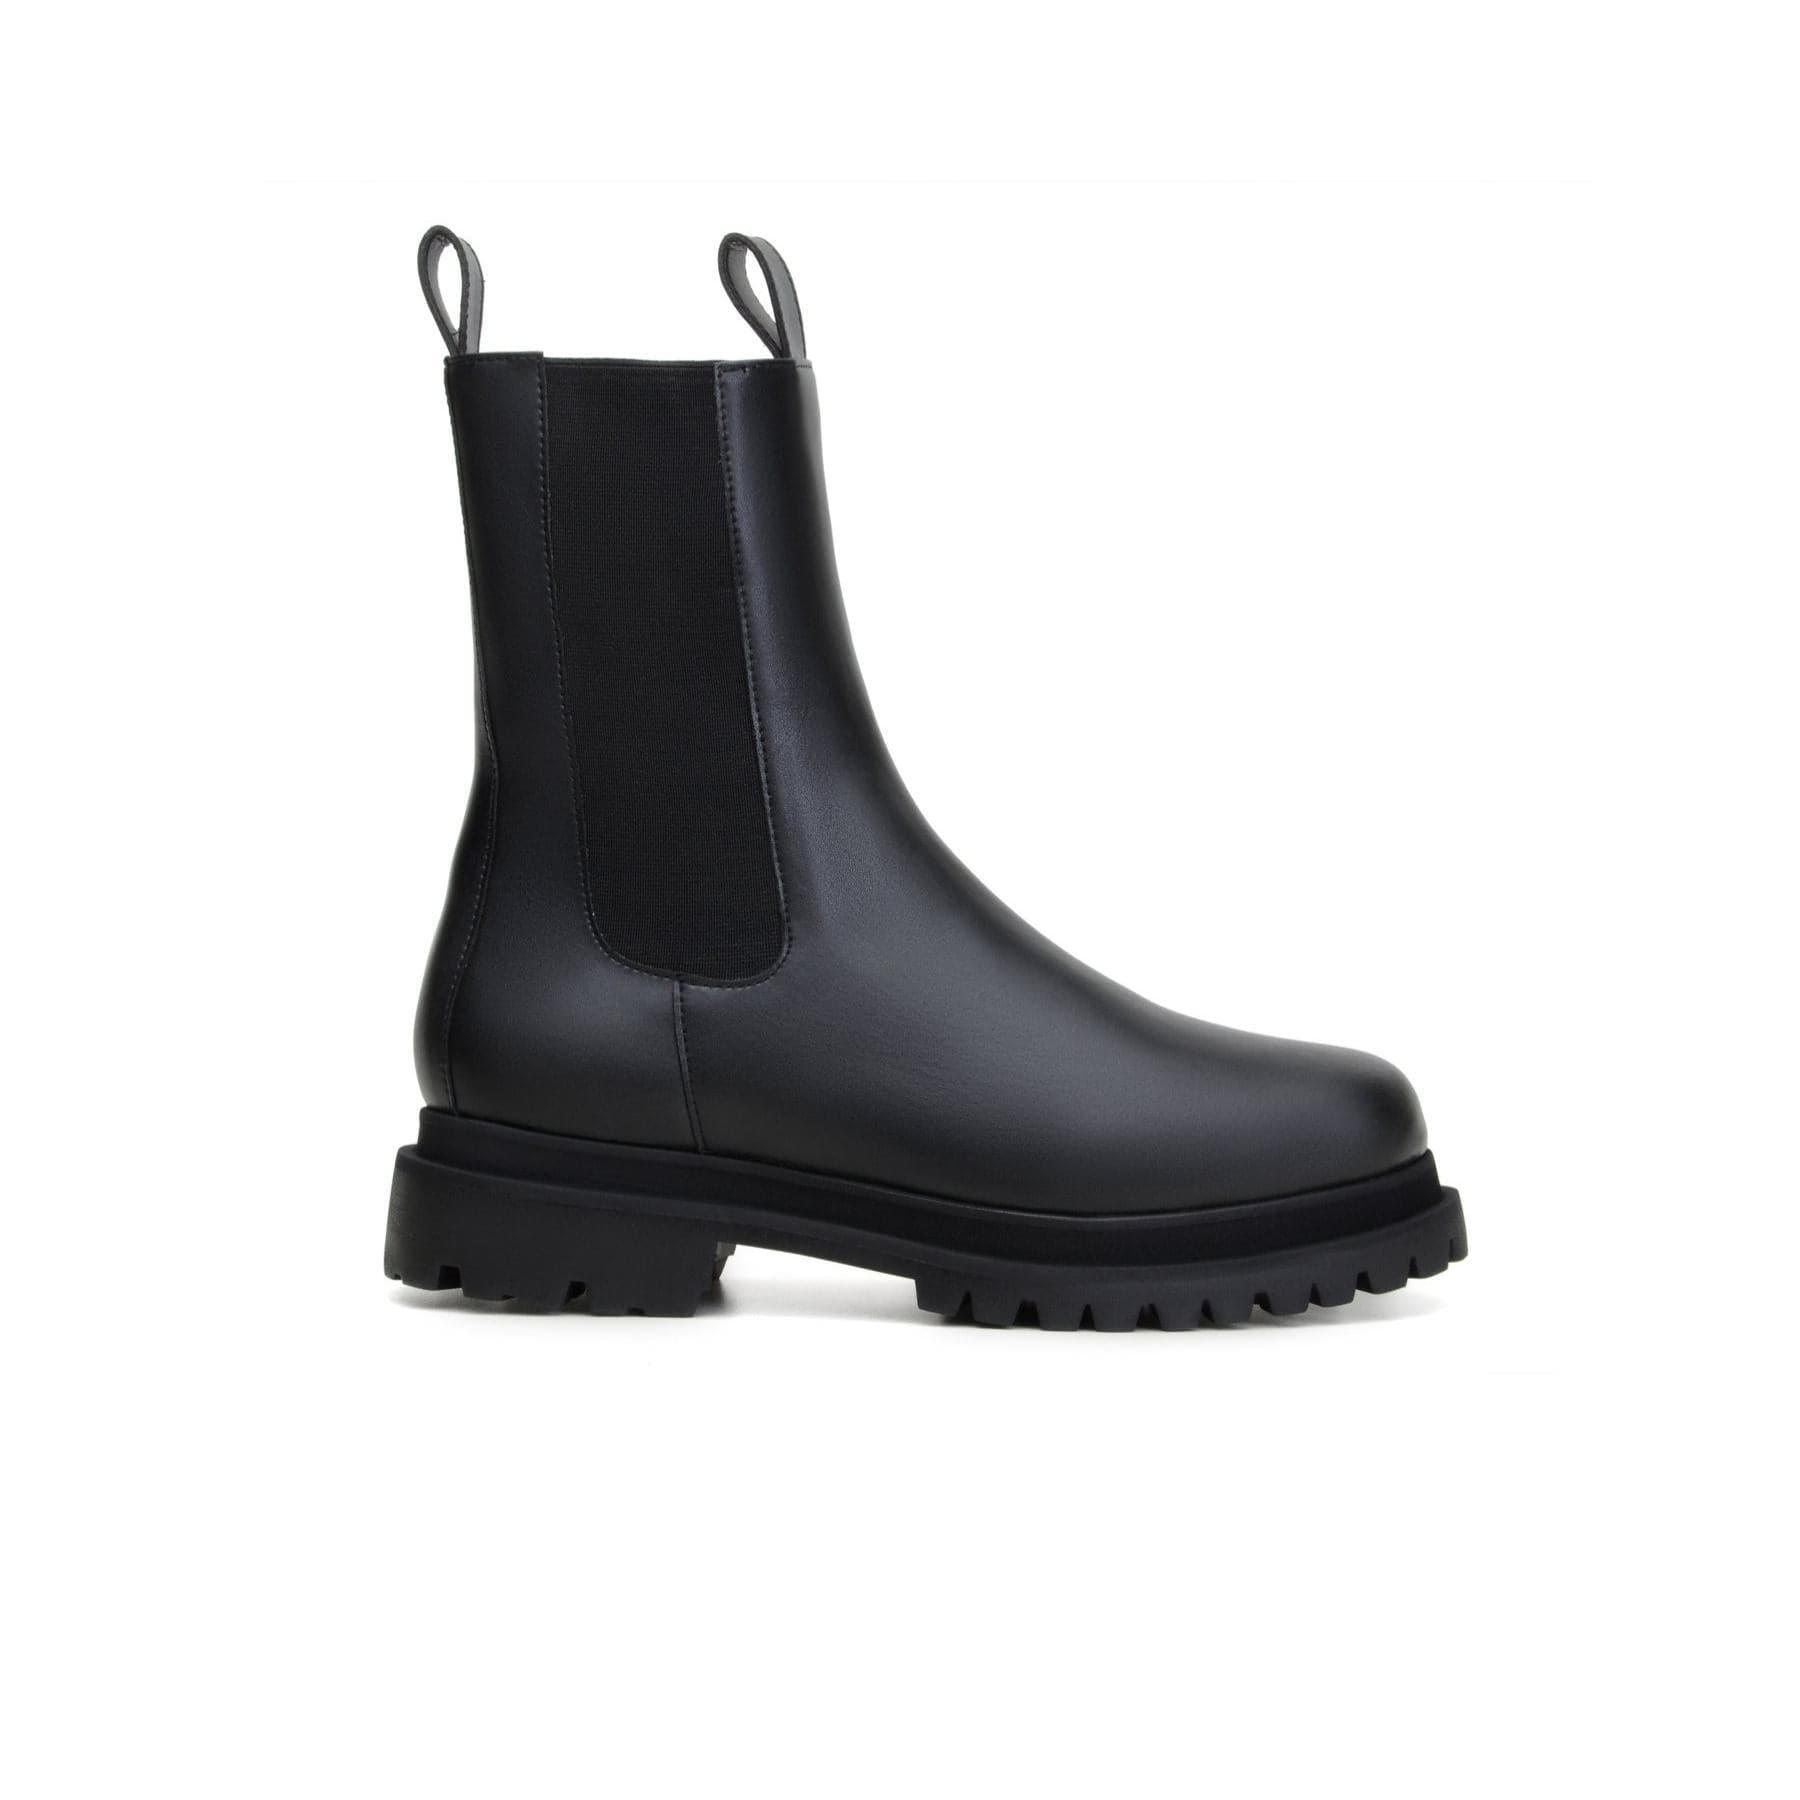 'Chloe' black vegan-leather chelsea boot with chunky sole by Zette Sho ...